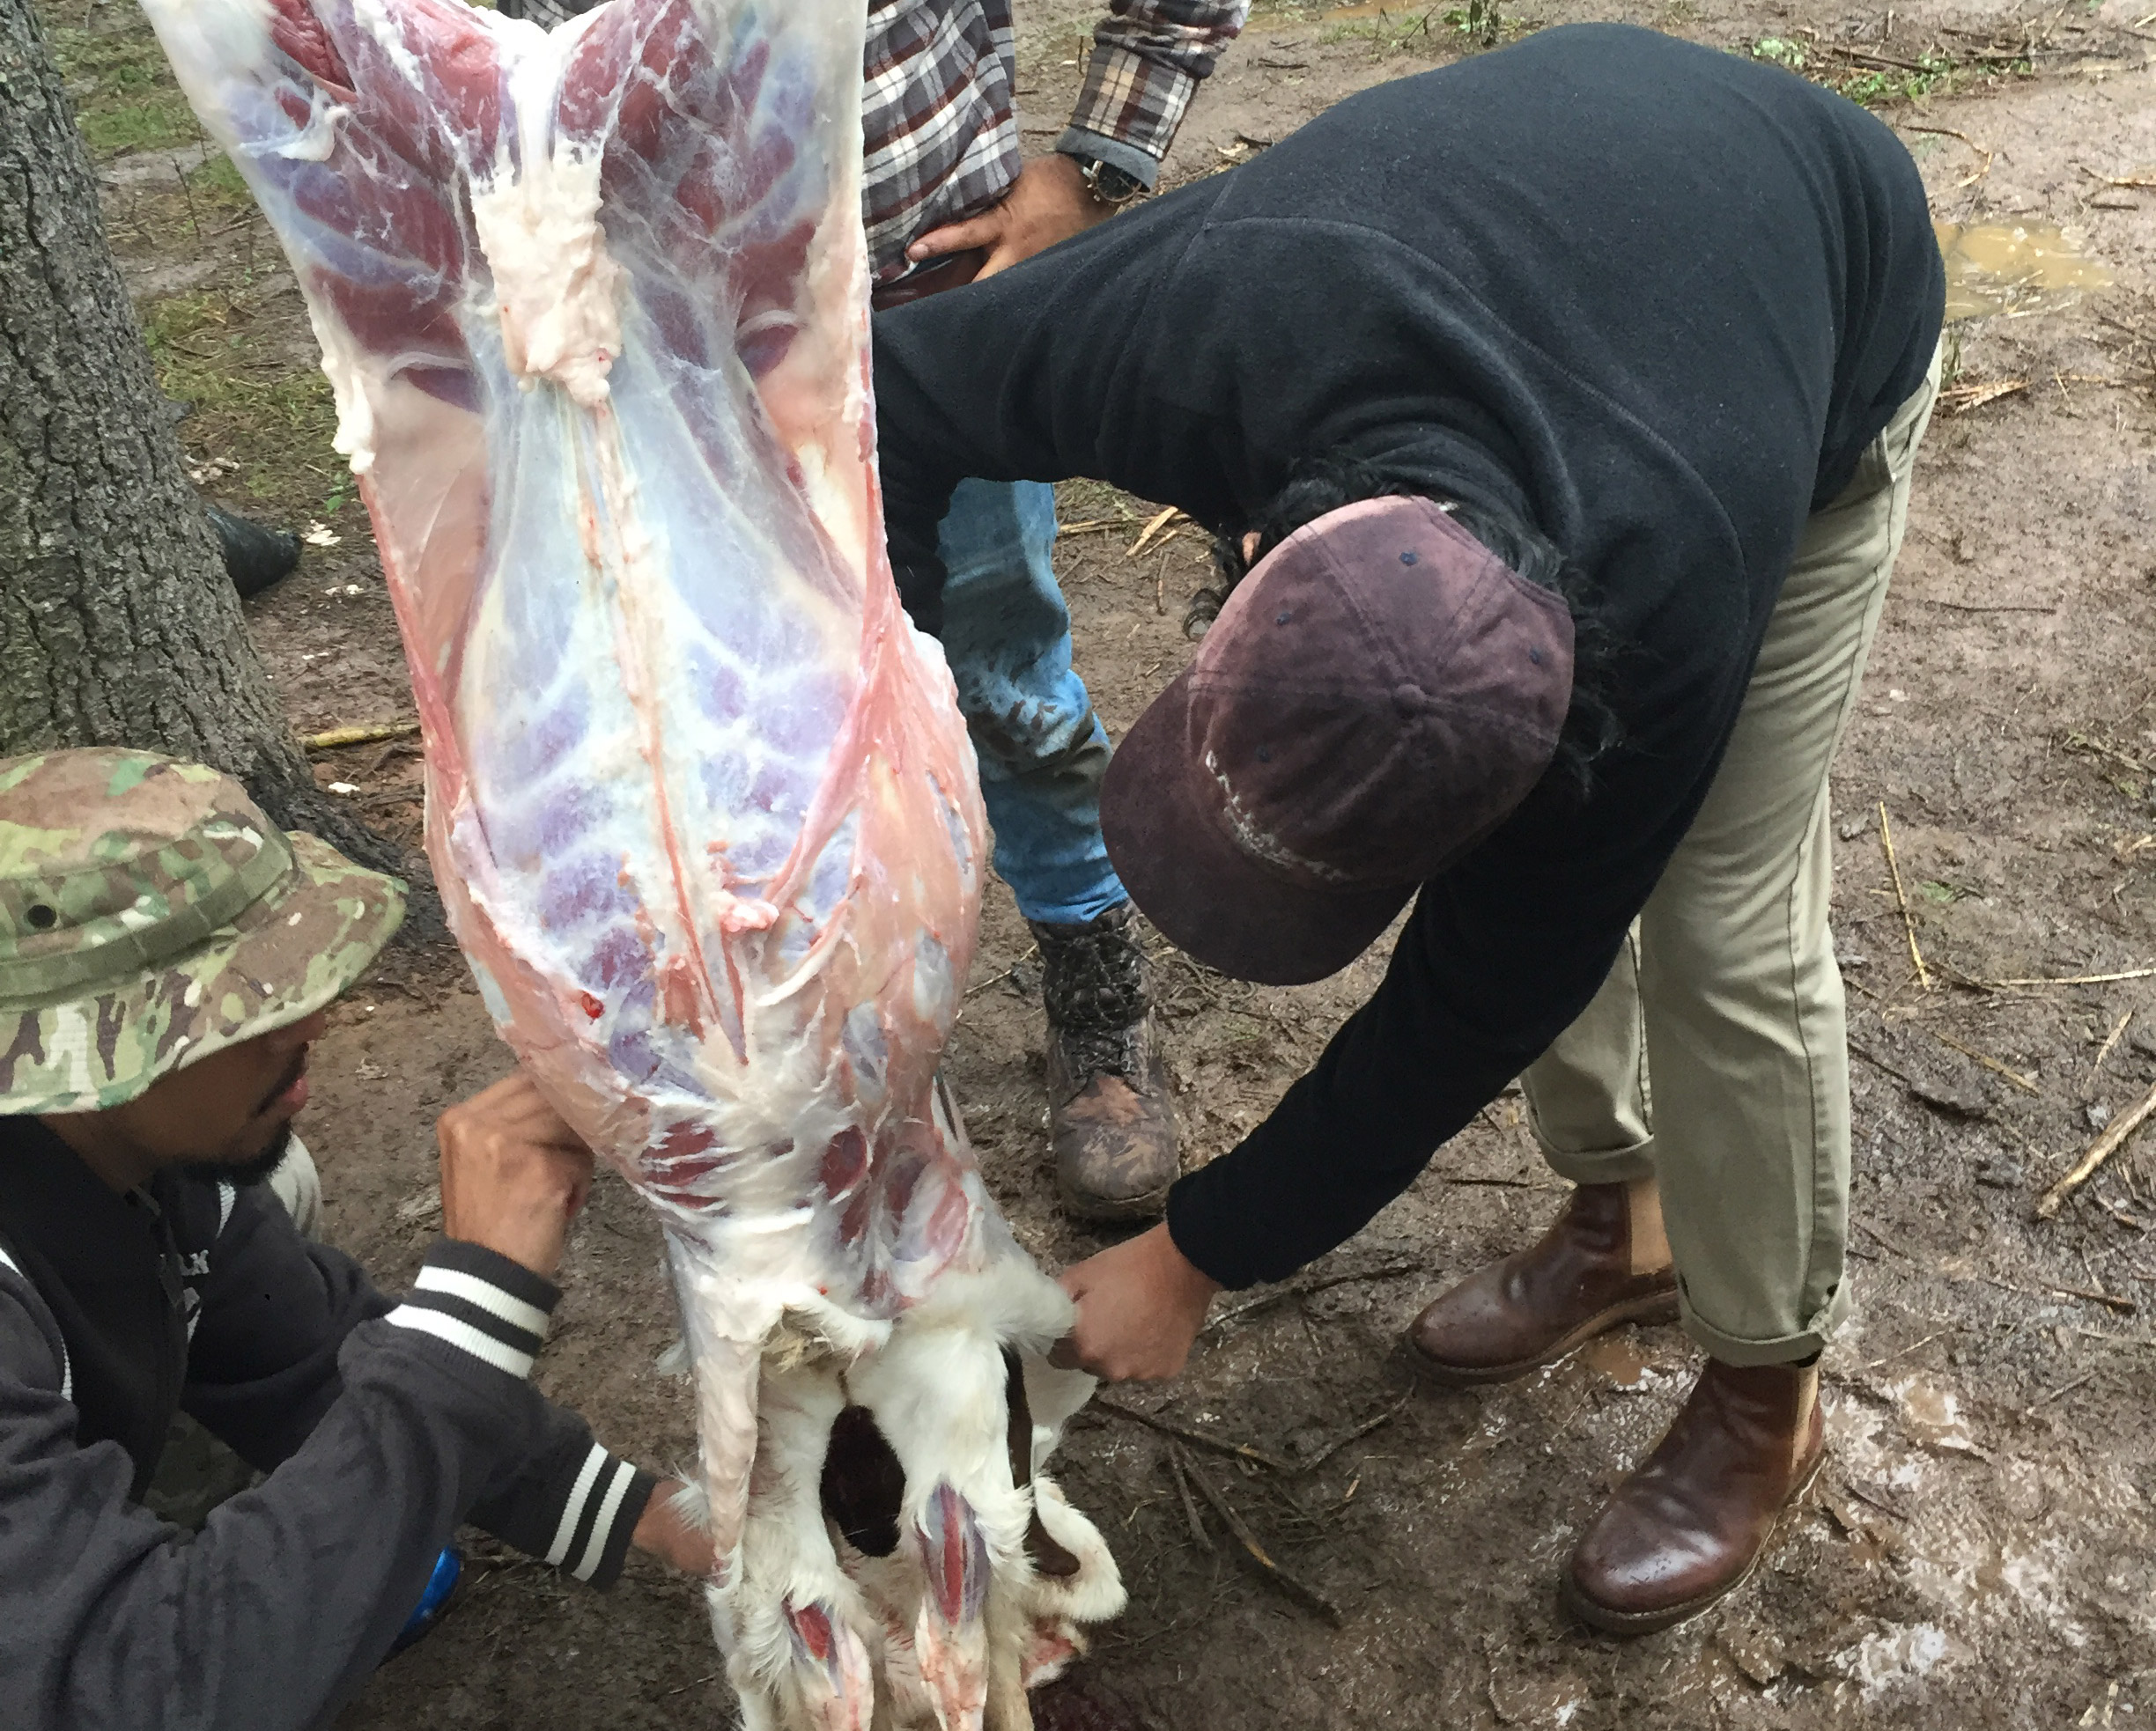 Two men skin a goat after slaughtering it.